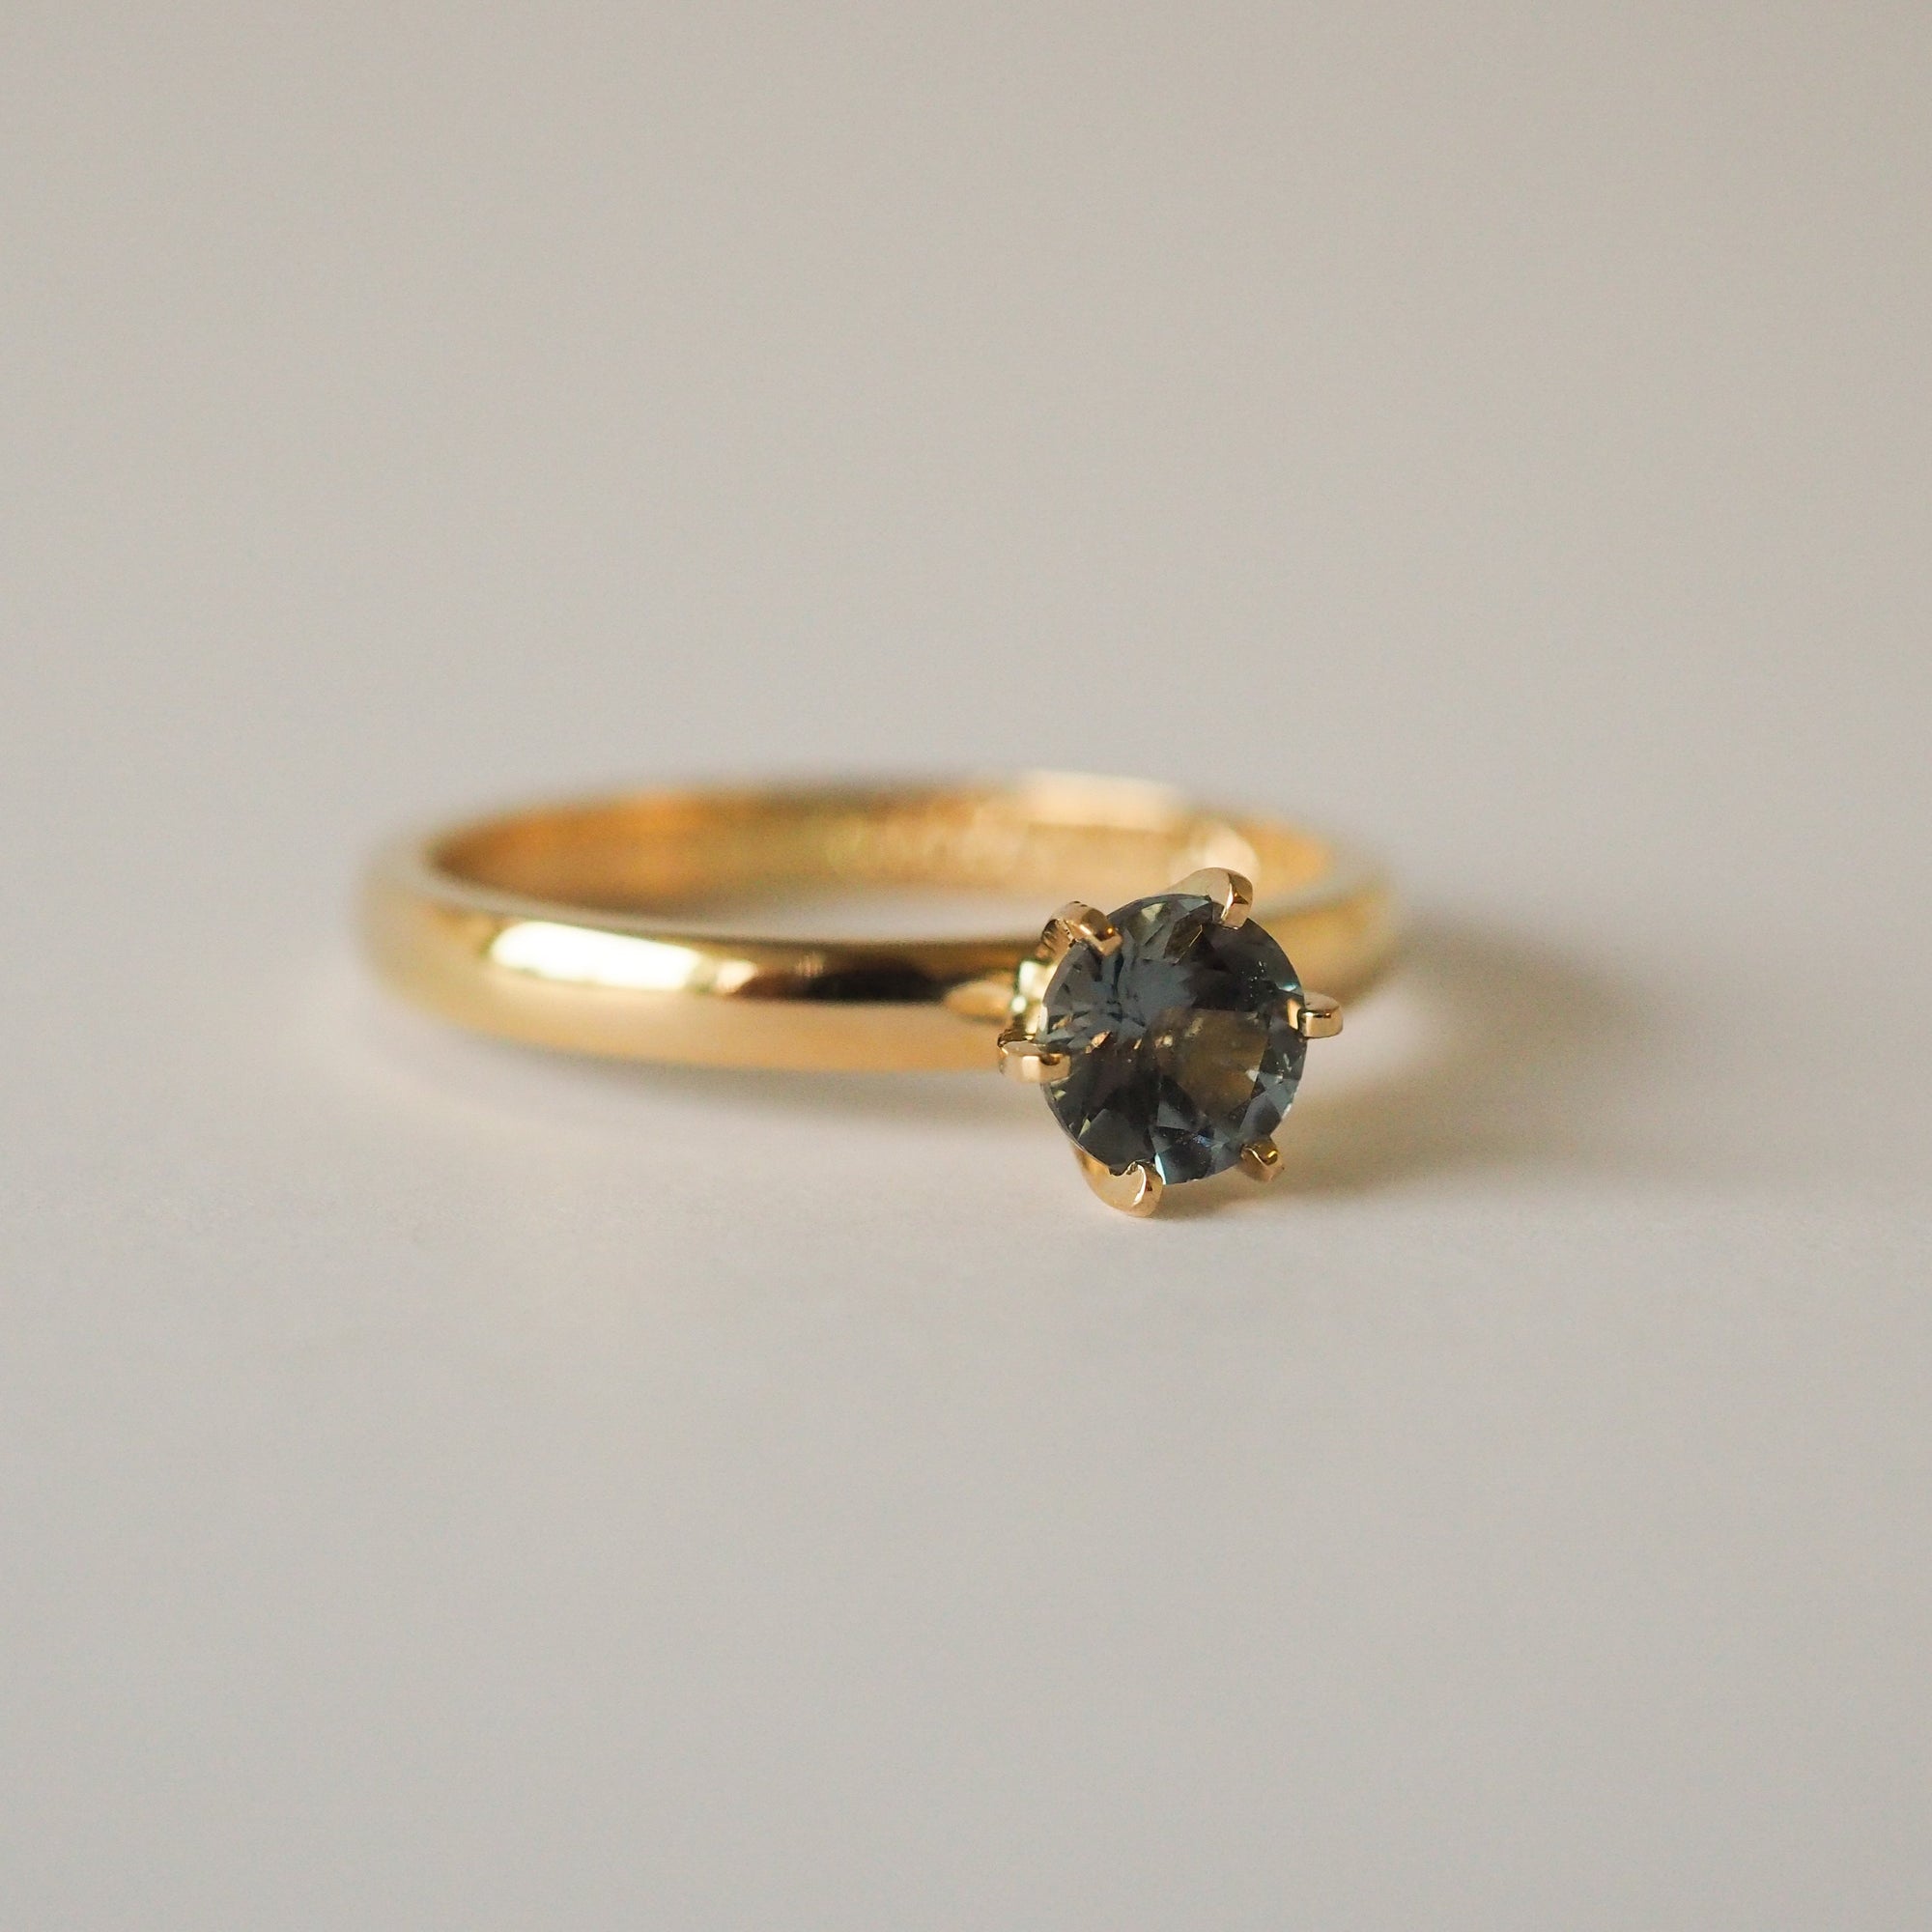 0.53ct Grey Spinel Solitaire Ring